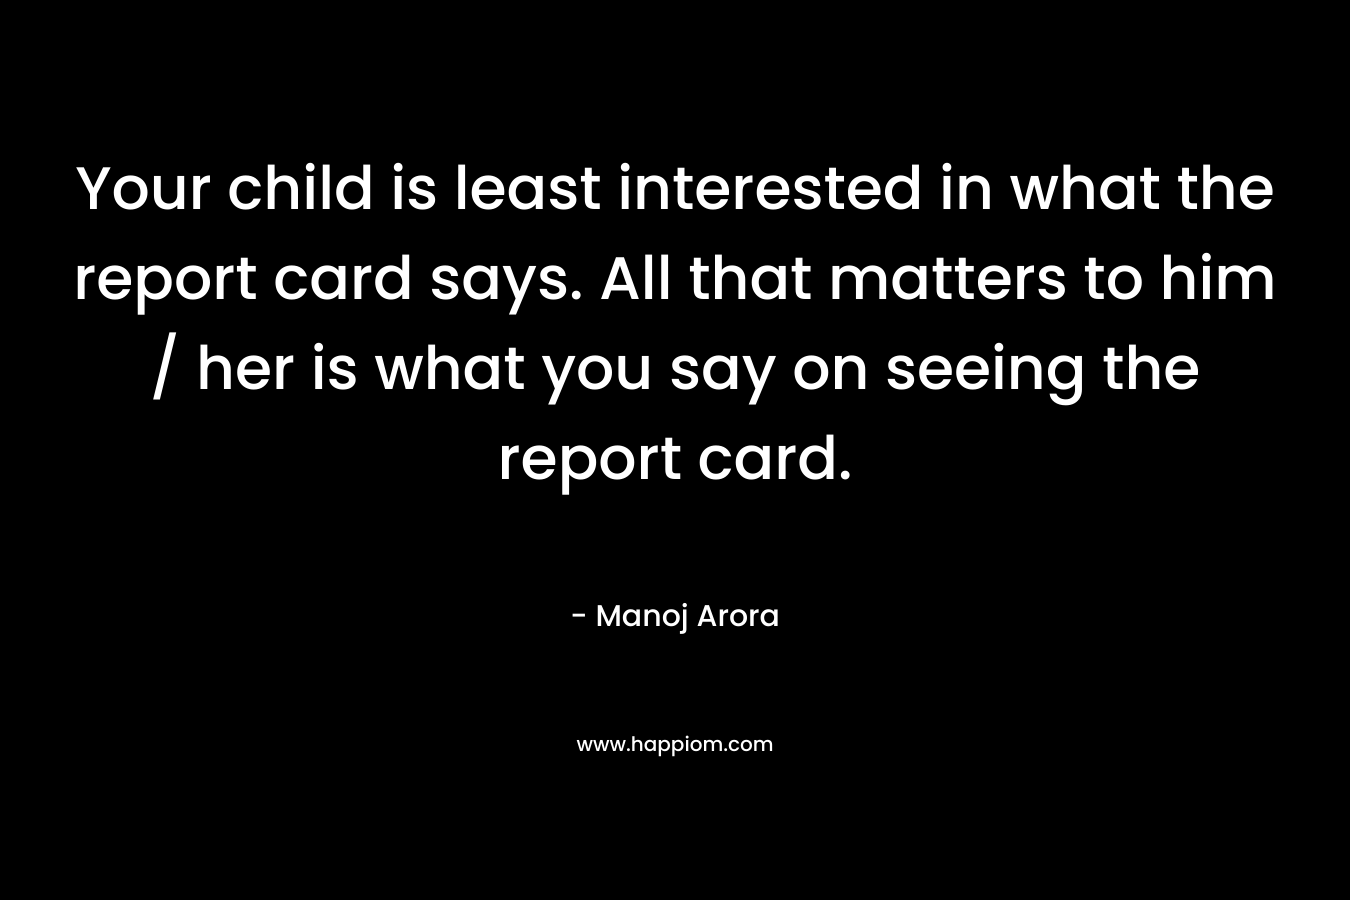 Your child is least interested in what the report card says. All that matters to him / her is what you say on seeing the report card.